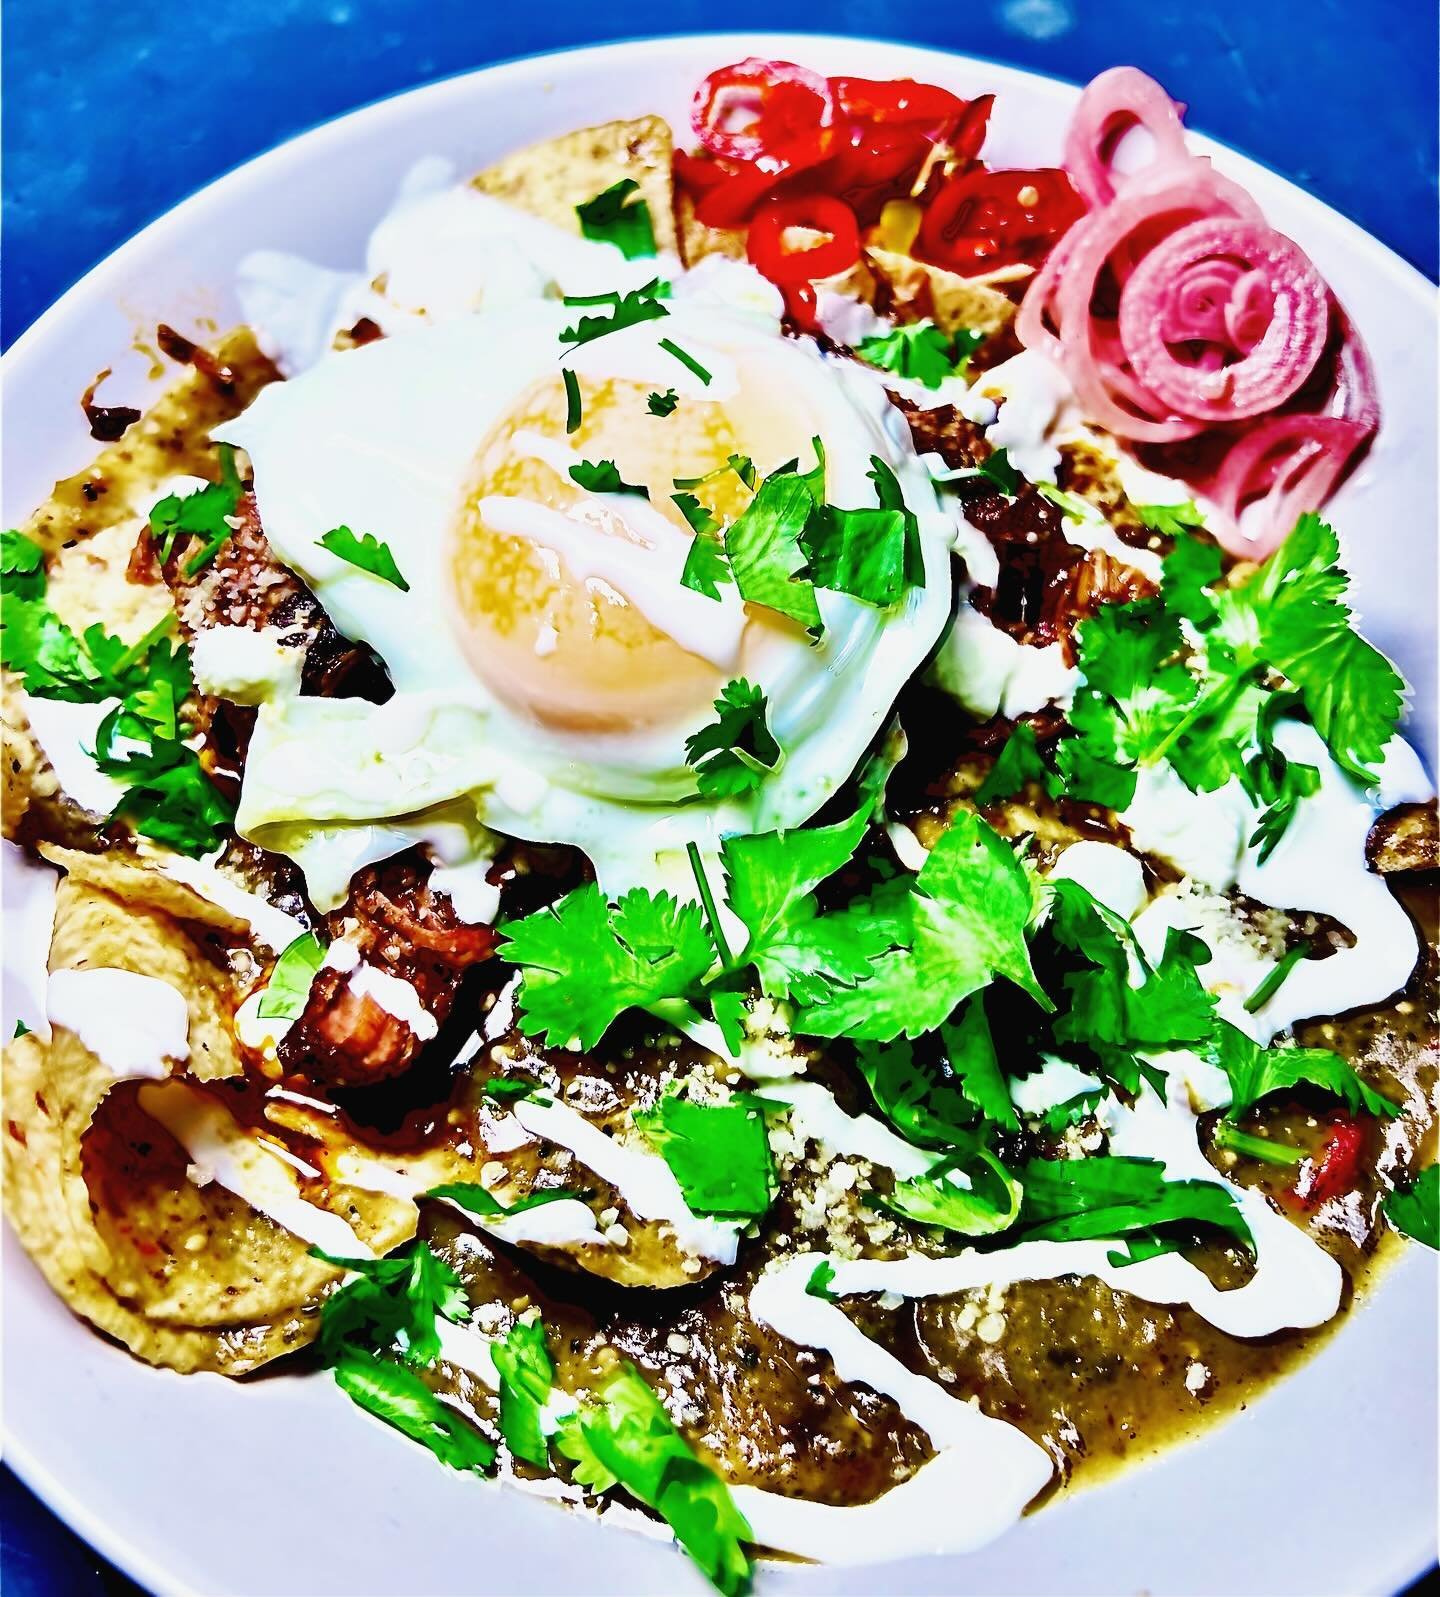 Start your Cinco de Mayo of right&hellip;with a good base. 👉 Chilaquiles wll do the trick!

EG&rsquo;s &ldquo;Almost Famous&rdquo; Brunch is on, 10am-1pm. Get your Sunday Funday off to a tasty start with Chilaquiles, Breakfast Tacos, and much more&h